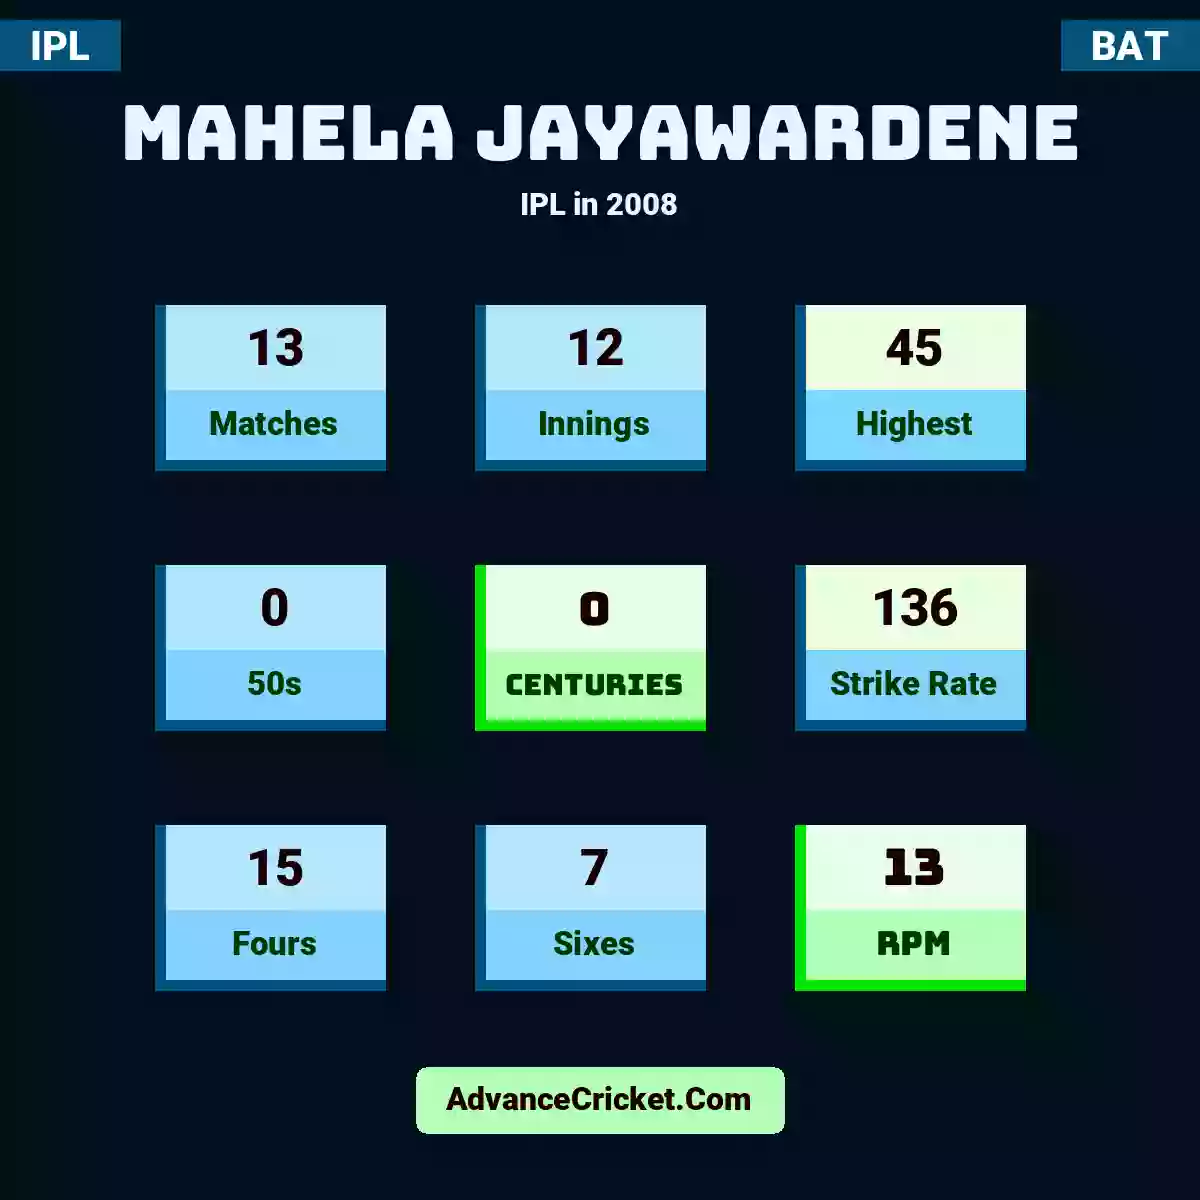 Mahela Jayawardene IPL  in 2008, Mahela Jayawardene played 13 matches, scored 45 runs as highest, 0 half-centuries, and 0 centuries, with a strike rate of 136. M.Jayawardene hit 15 fours and 7 sixes, with an RPM of 13.